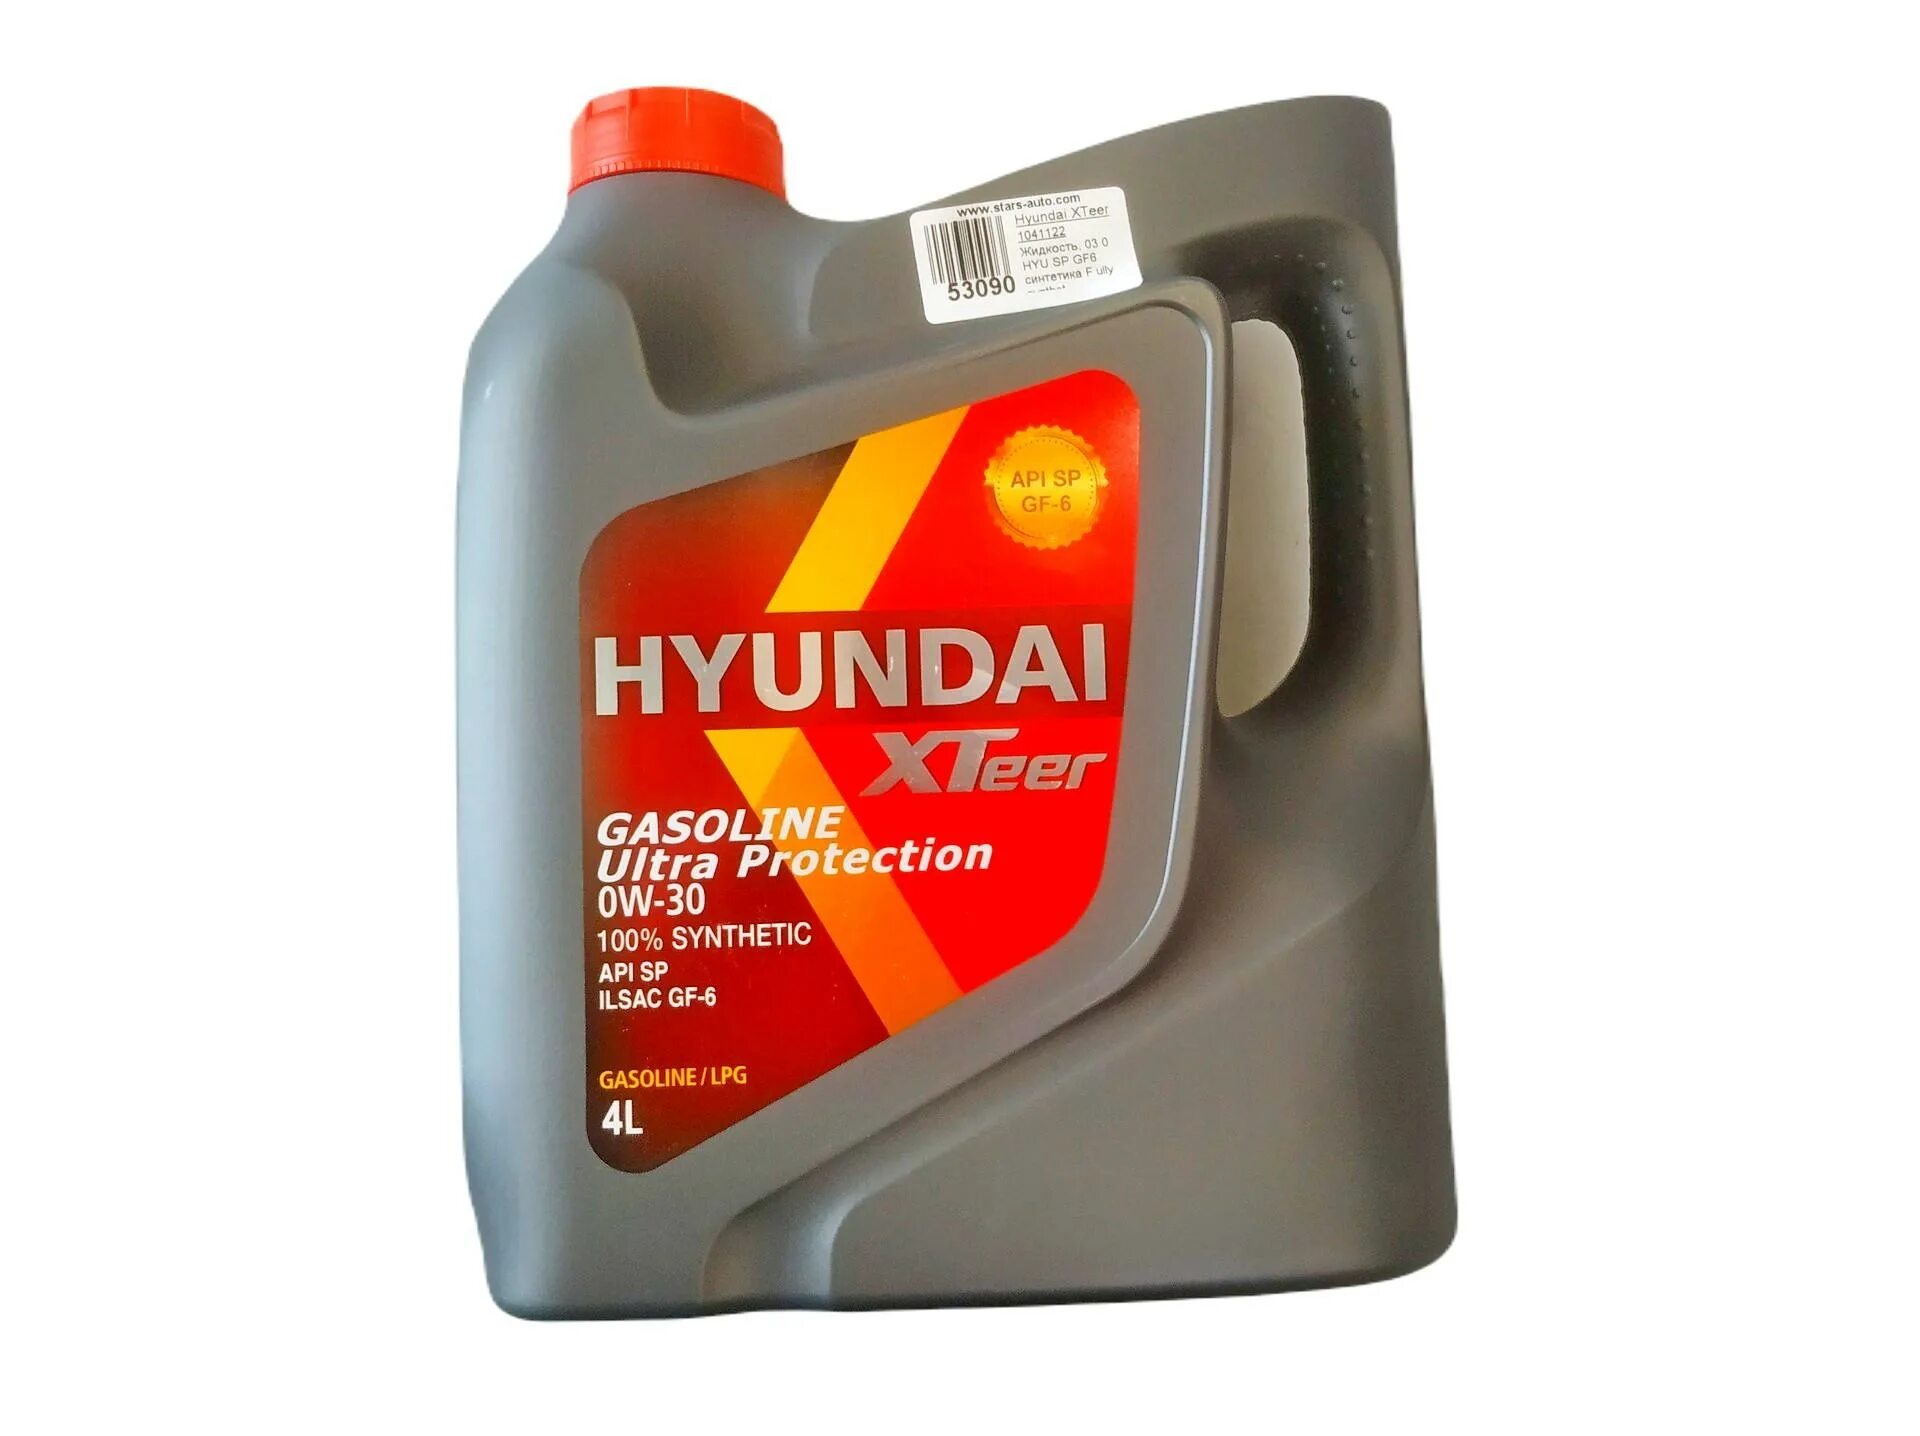 Hyundai xteer gasoline. Hyundai XTEER. Hyundai XTEER 1041412. Hyundai XTEER Gear Oil-5 75w90. Hyundai XTEER 1041126 Hyundai XTEER (g800) gasoline Ultra Protection.